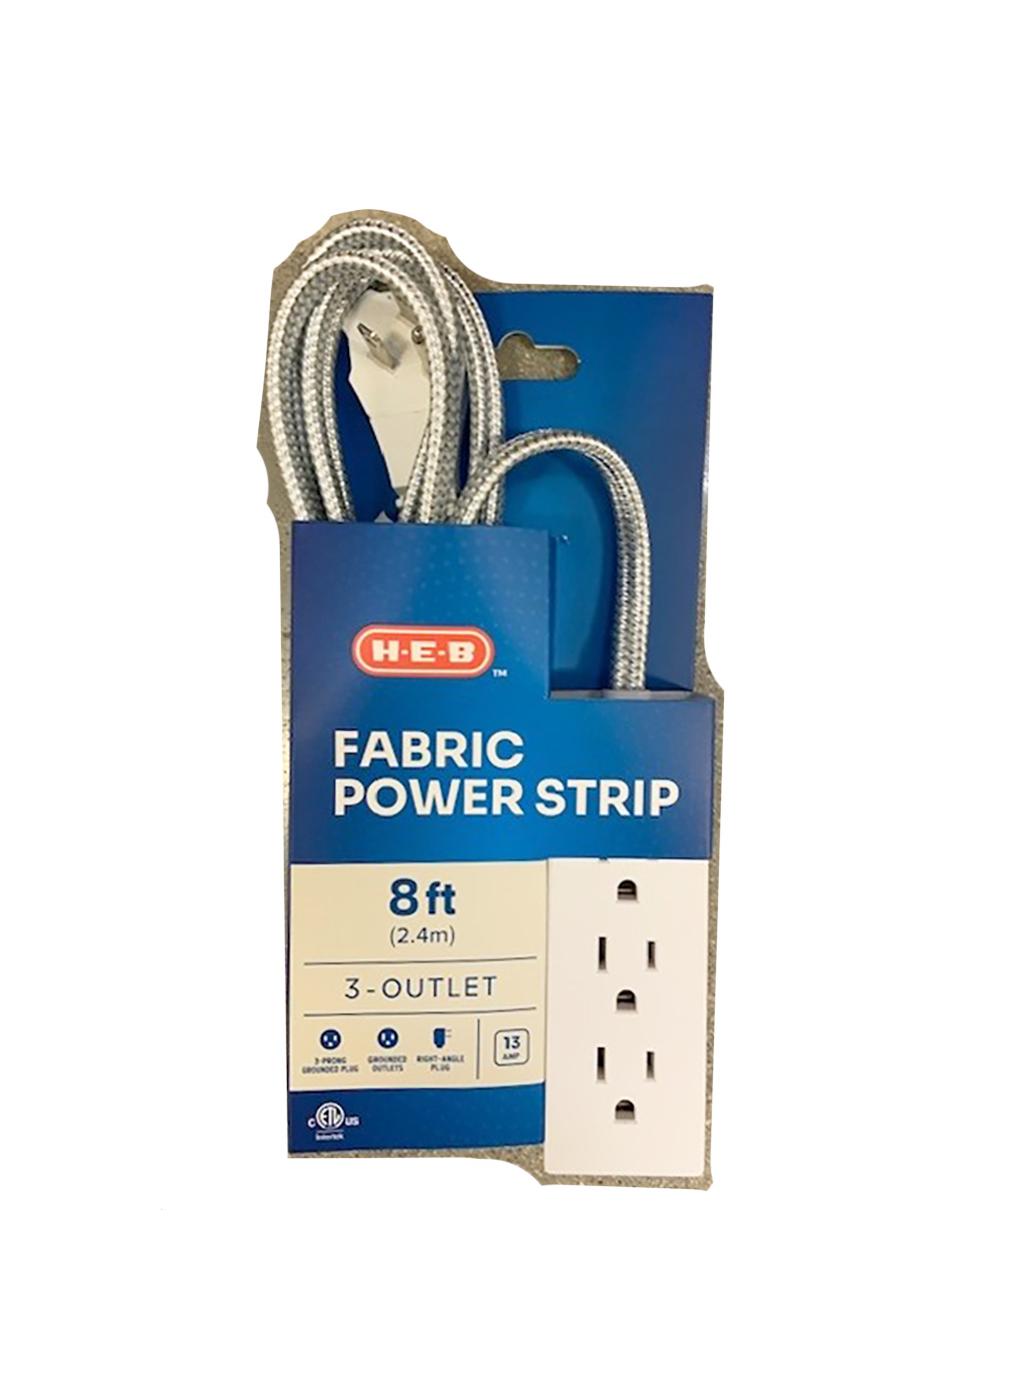 H-E-B 3-Outlet Indoor Fabric Power Strip - White; image 1 of 2